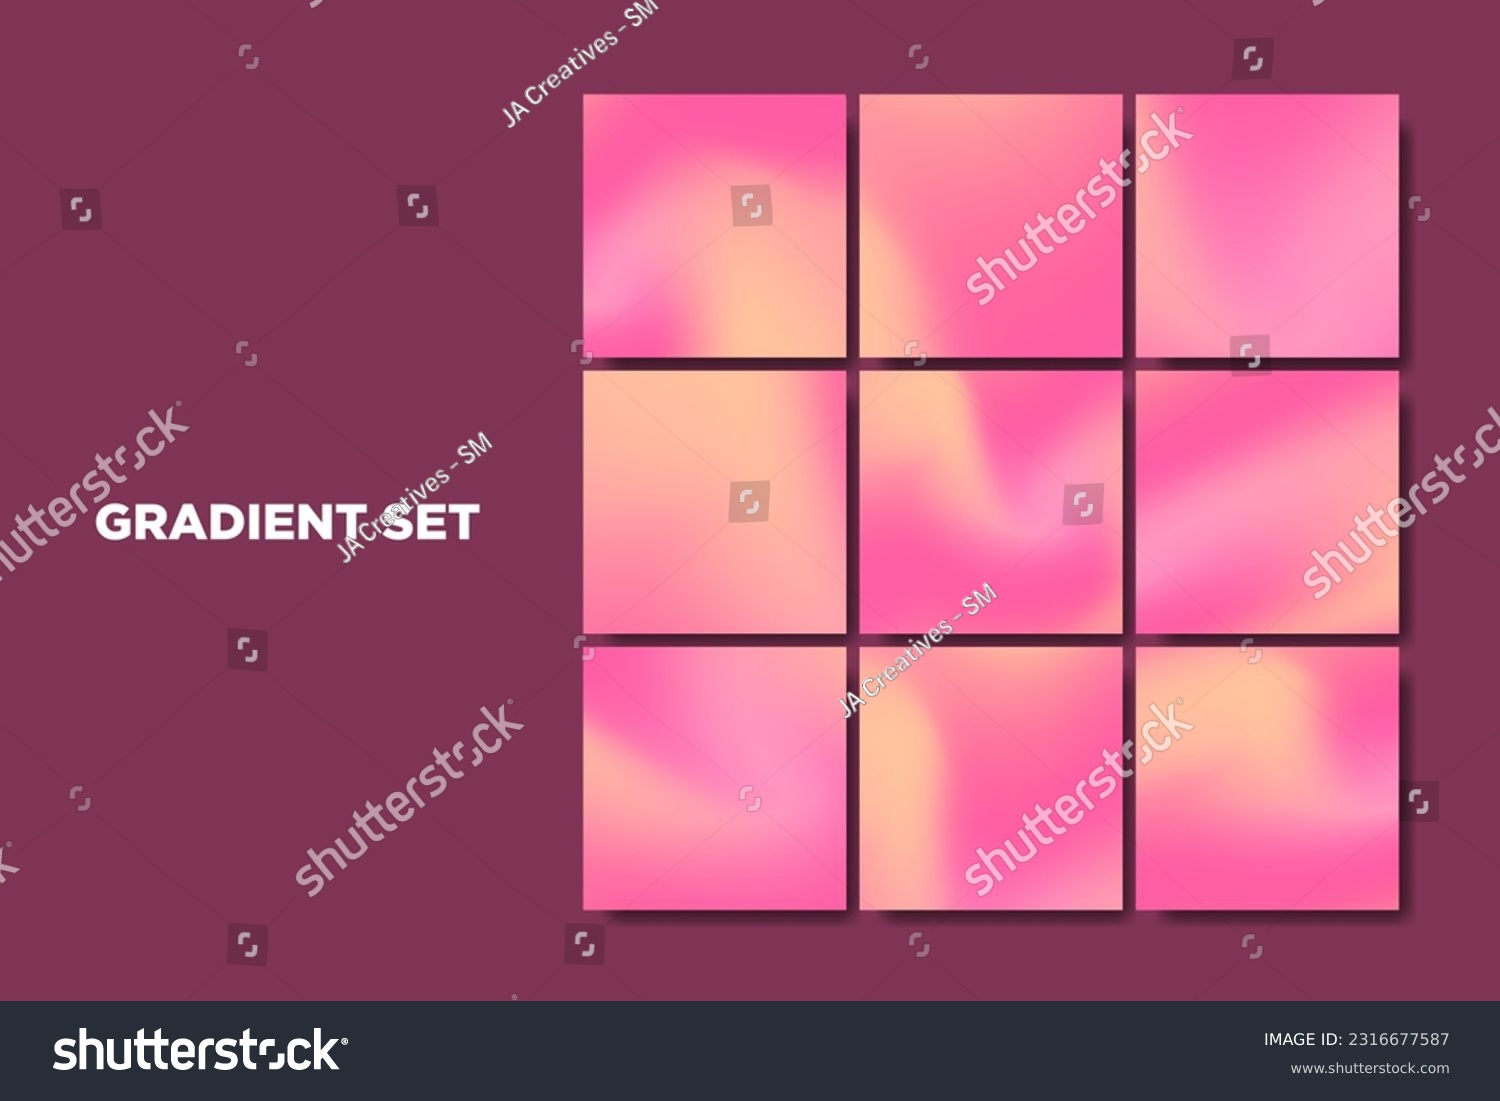 SVG of Set of vibrant pastel sunrise color designs with flowing watercolor hues. Swirling gradient mesh in shades of pink, red, and magenta. Rose and salmon pink gradient background. EPS 10 svg